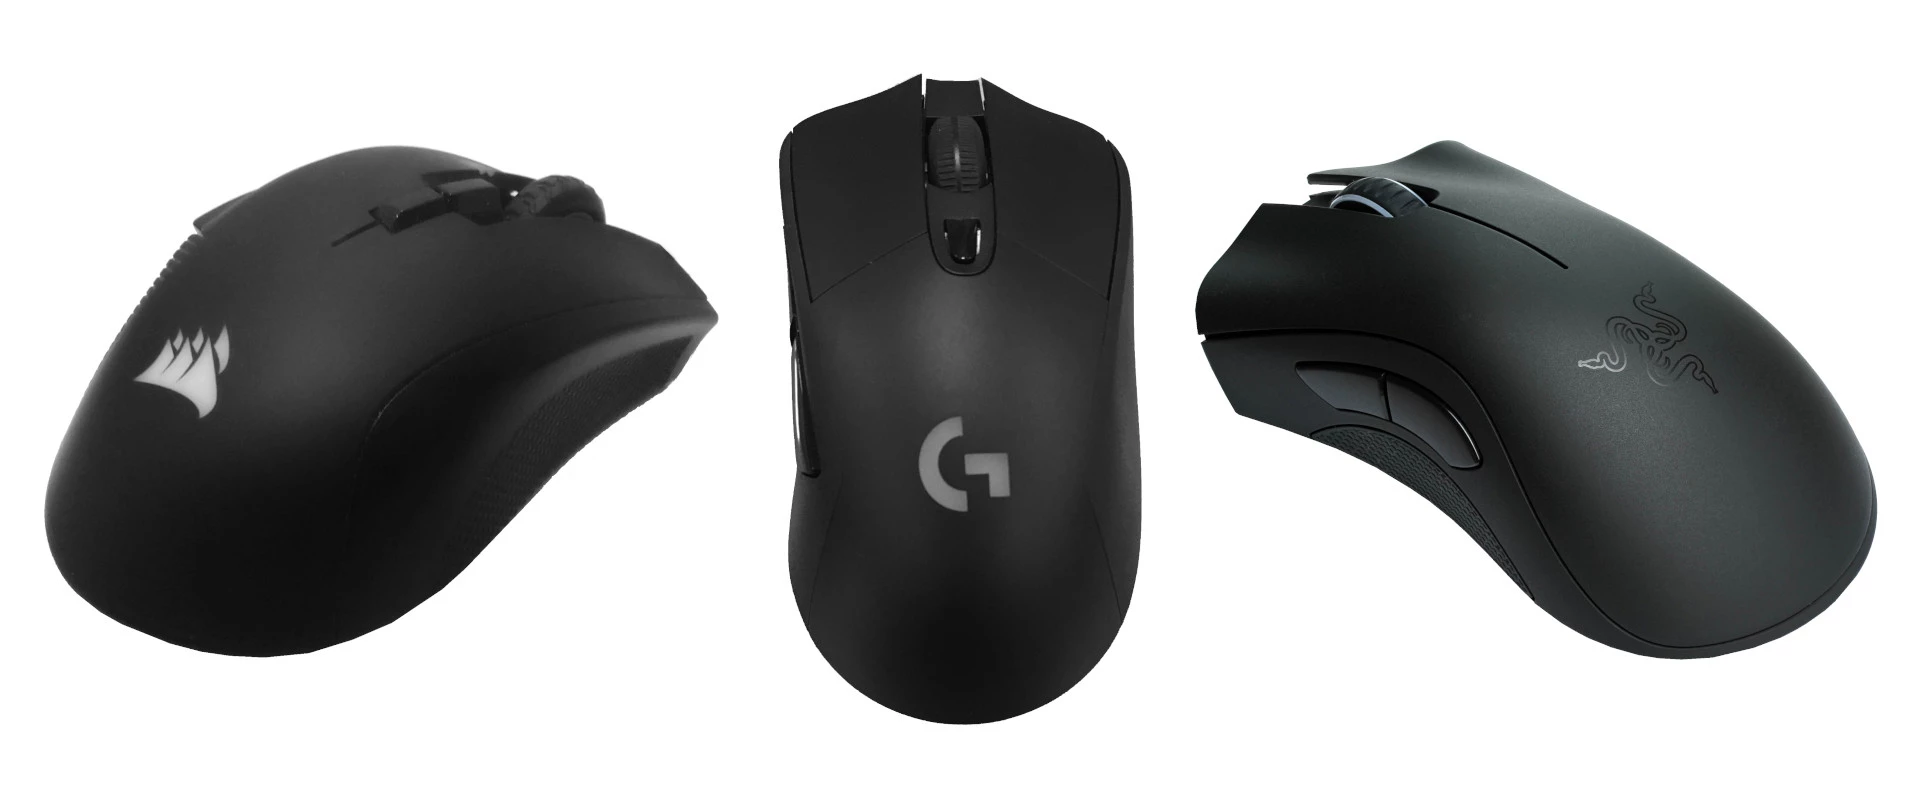 picture of 3 computer mice